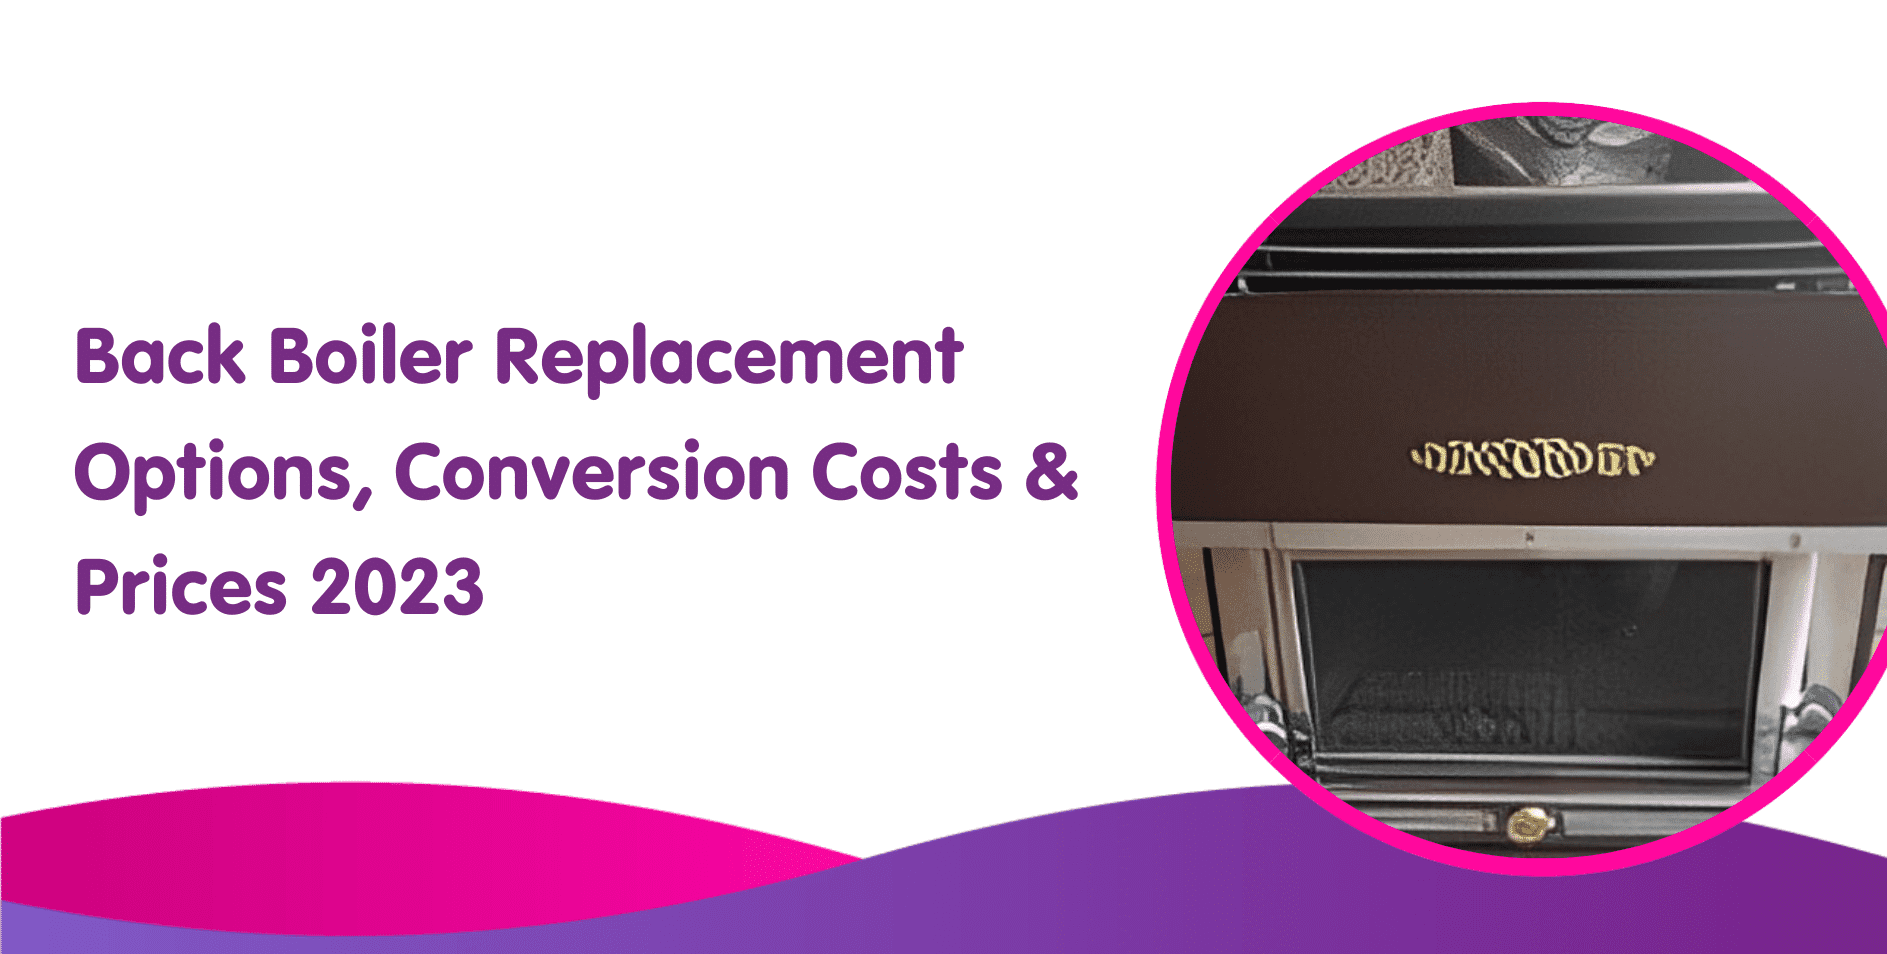 Back Boiler Replacement Costs & Conversion Prices 2023